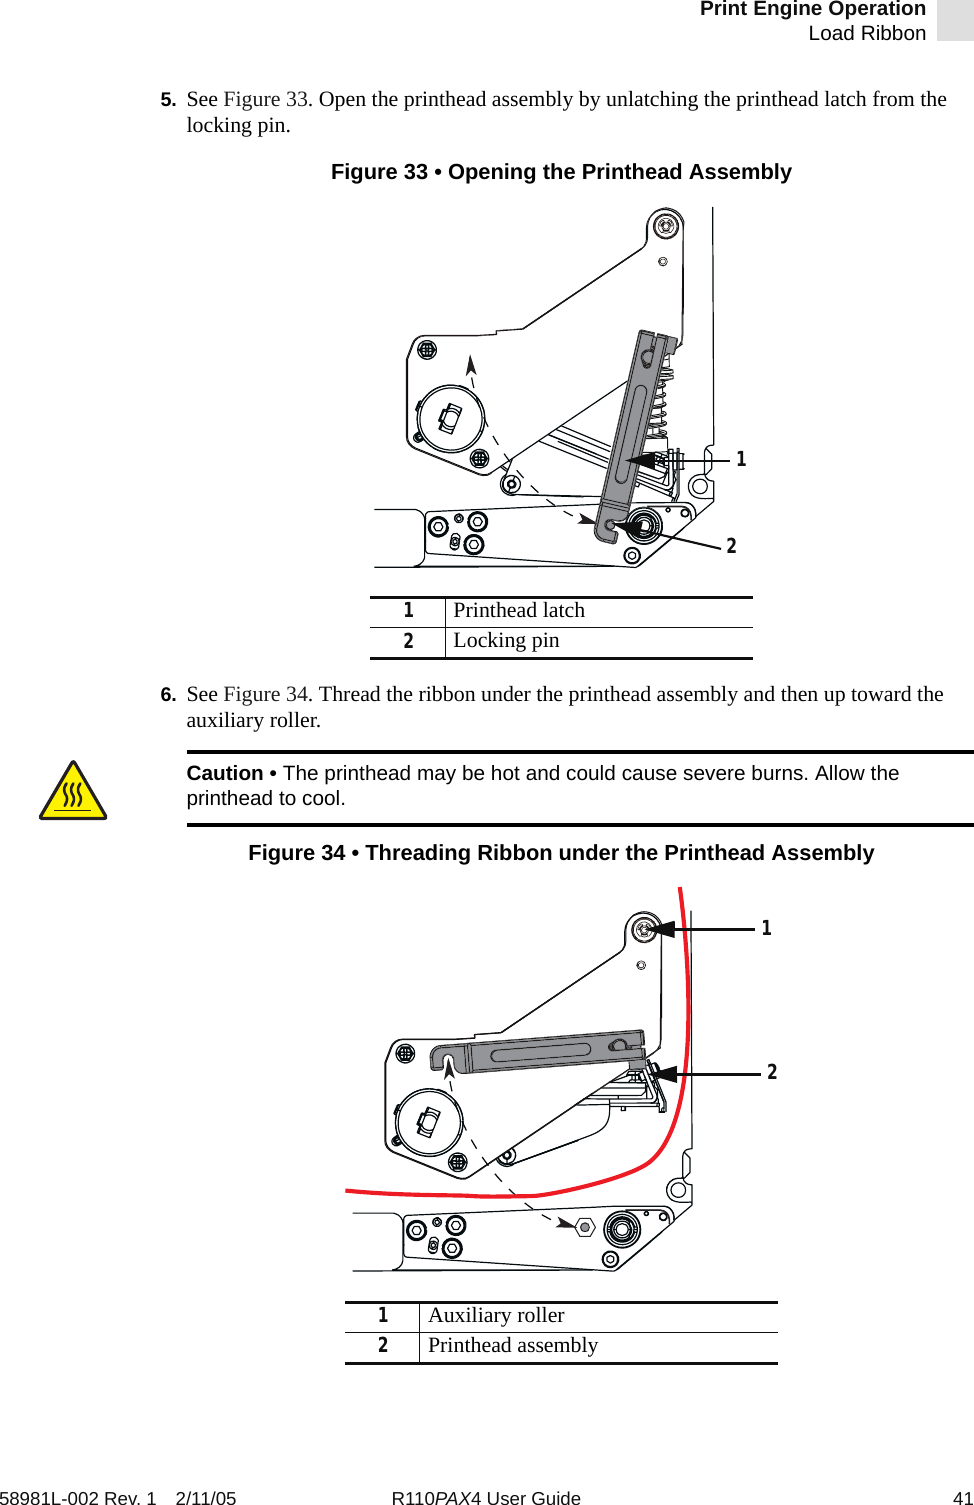 Print Engine OperationLoad Ribbon58981L-002 Rev. 1 2/11/05 R110PAX4 User Guide 415. See Figure 33. Open the printhead assembly by unlatching the printhead latch from the locking pin.Figure 33 • Opening the Printhead Assembly6. See Figure 34. Thread the ribbon under the printhead assembly and then up toward the auxiliary roller.Figure 34 • Threading Ribbon under the Printhead Assembly1Printhead latch2Locking pinCaution • The printhead may be hot and could cause severe burns. Allow the printhead to cool.1Auxiliary roller2Printhead assembly1221